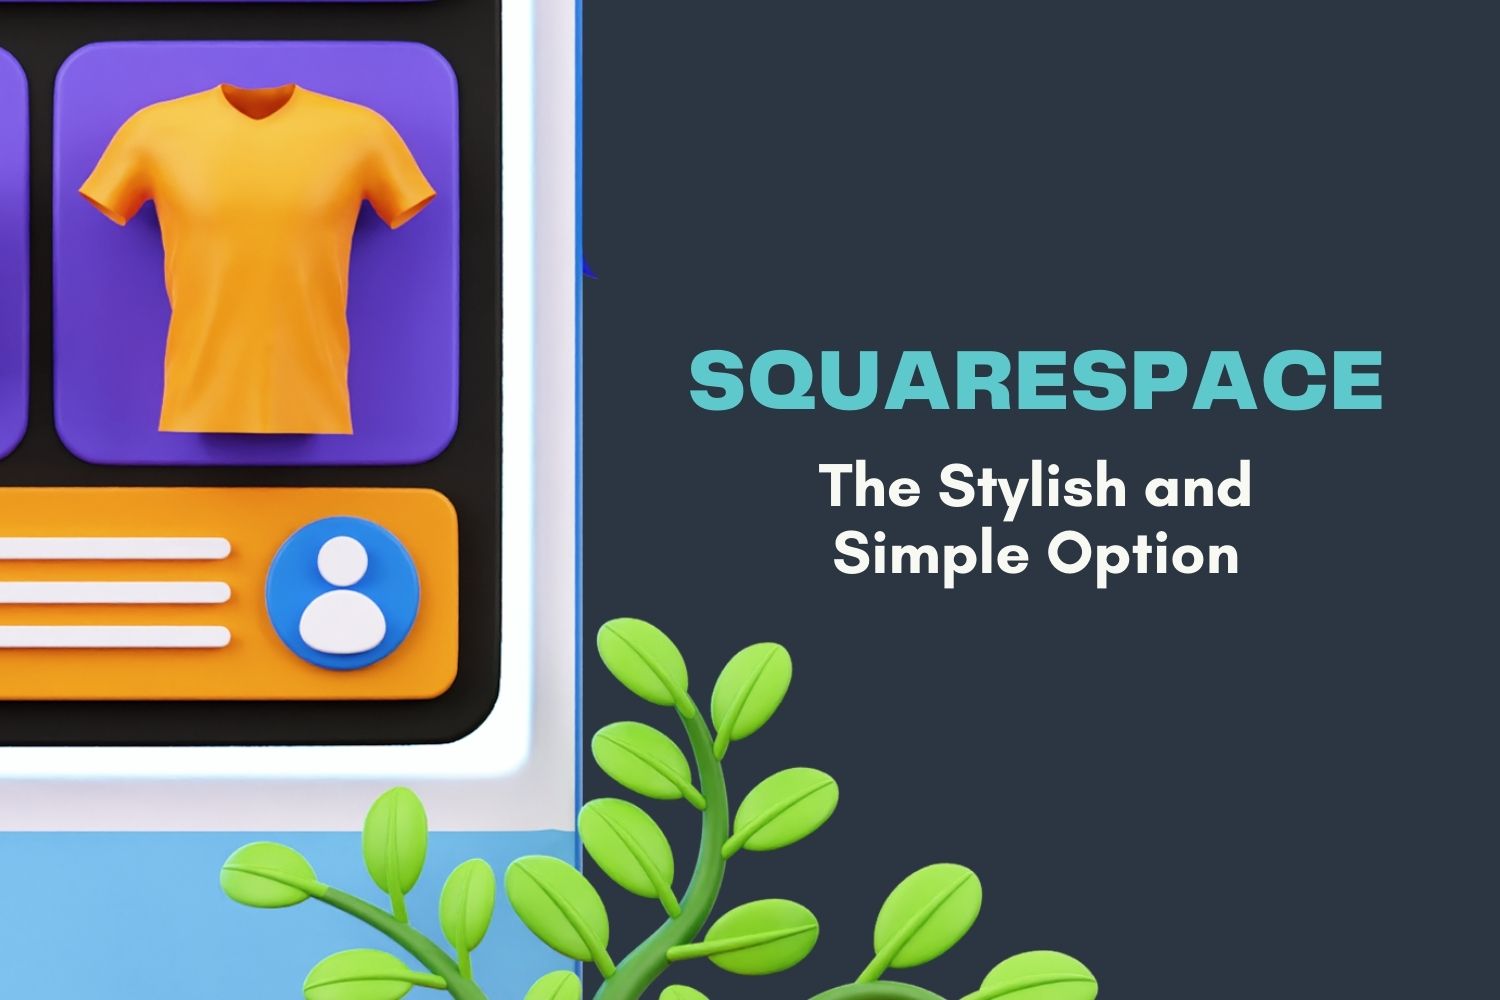 Shopify vs. Squarespace vs. WooCommerce: Which Is Better?